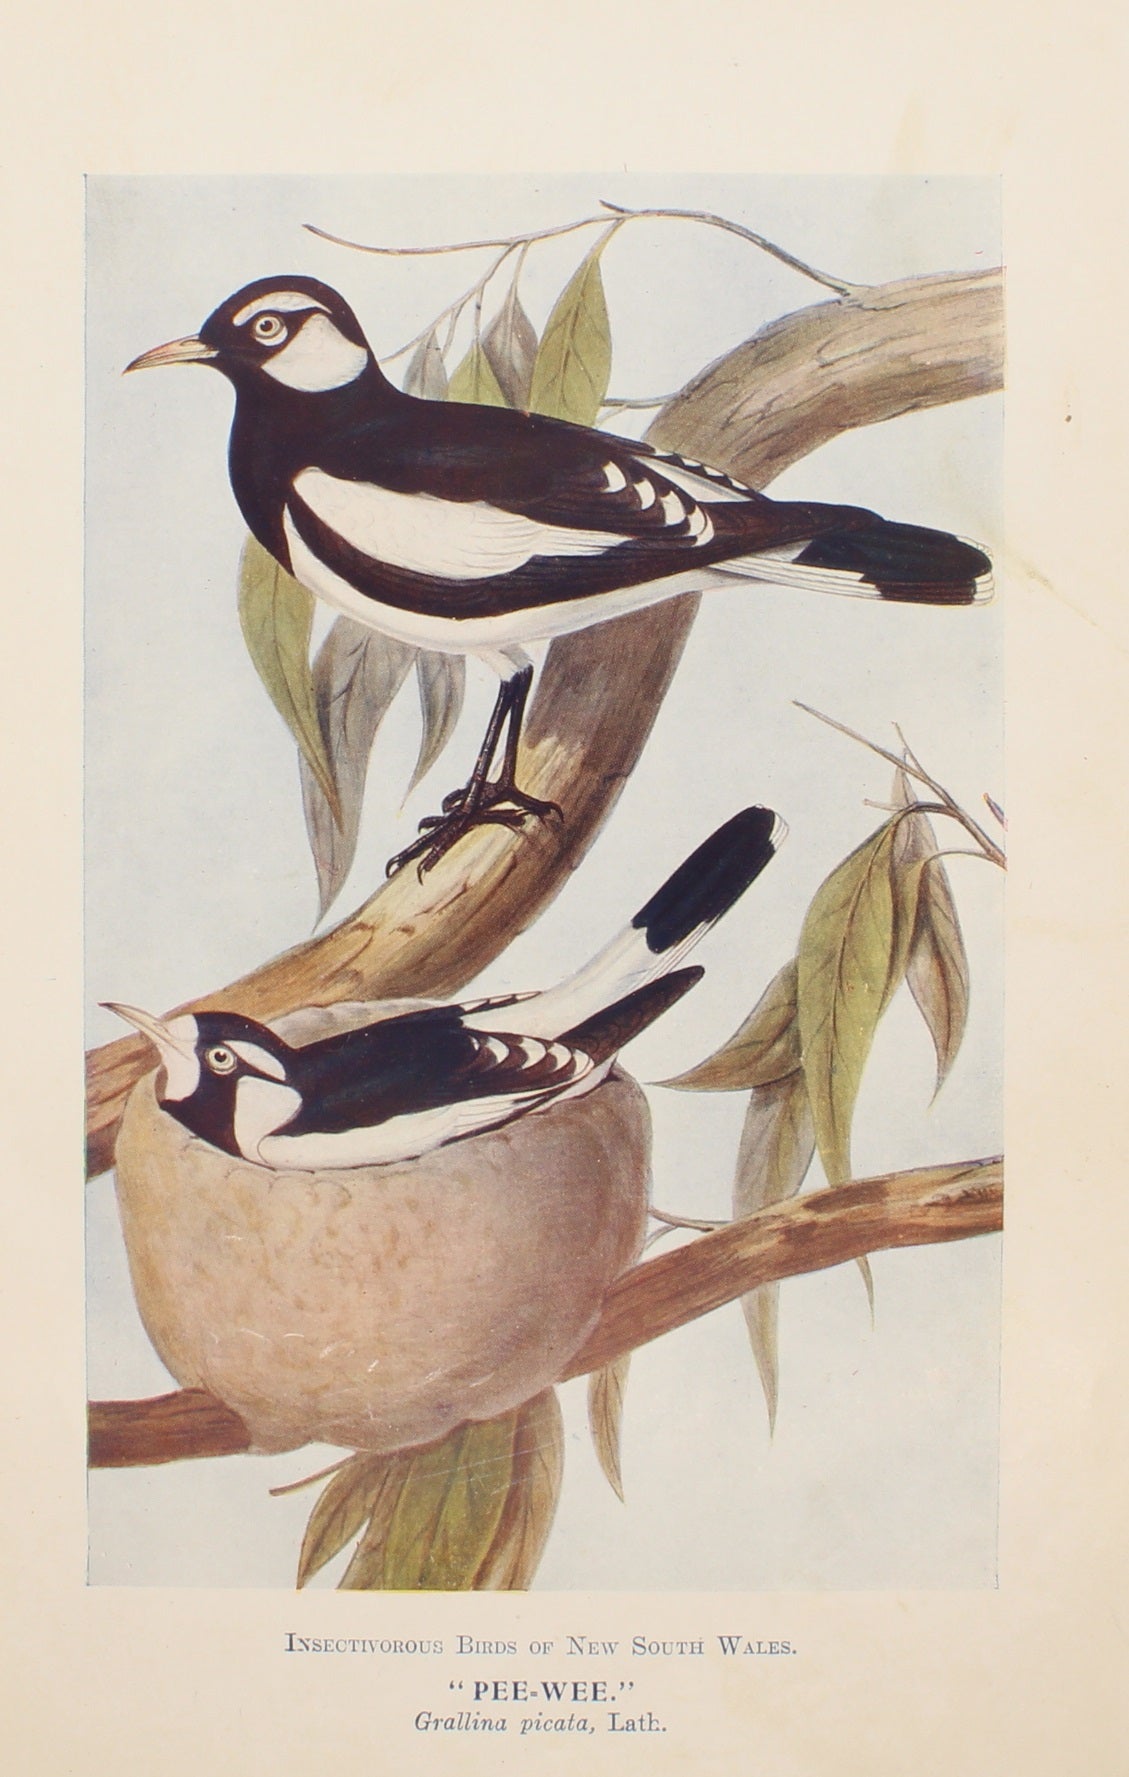 Bird, North, Alfred John, Pee Wee, Insectivorous Birds of NSW, 1896-7